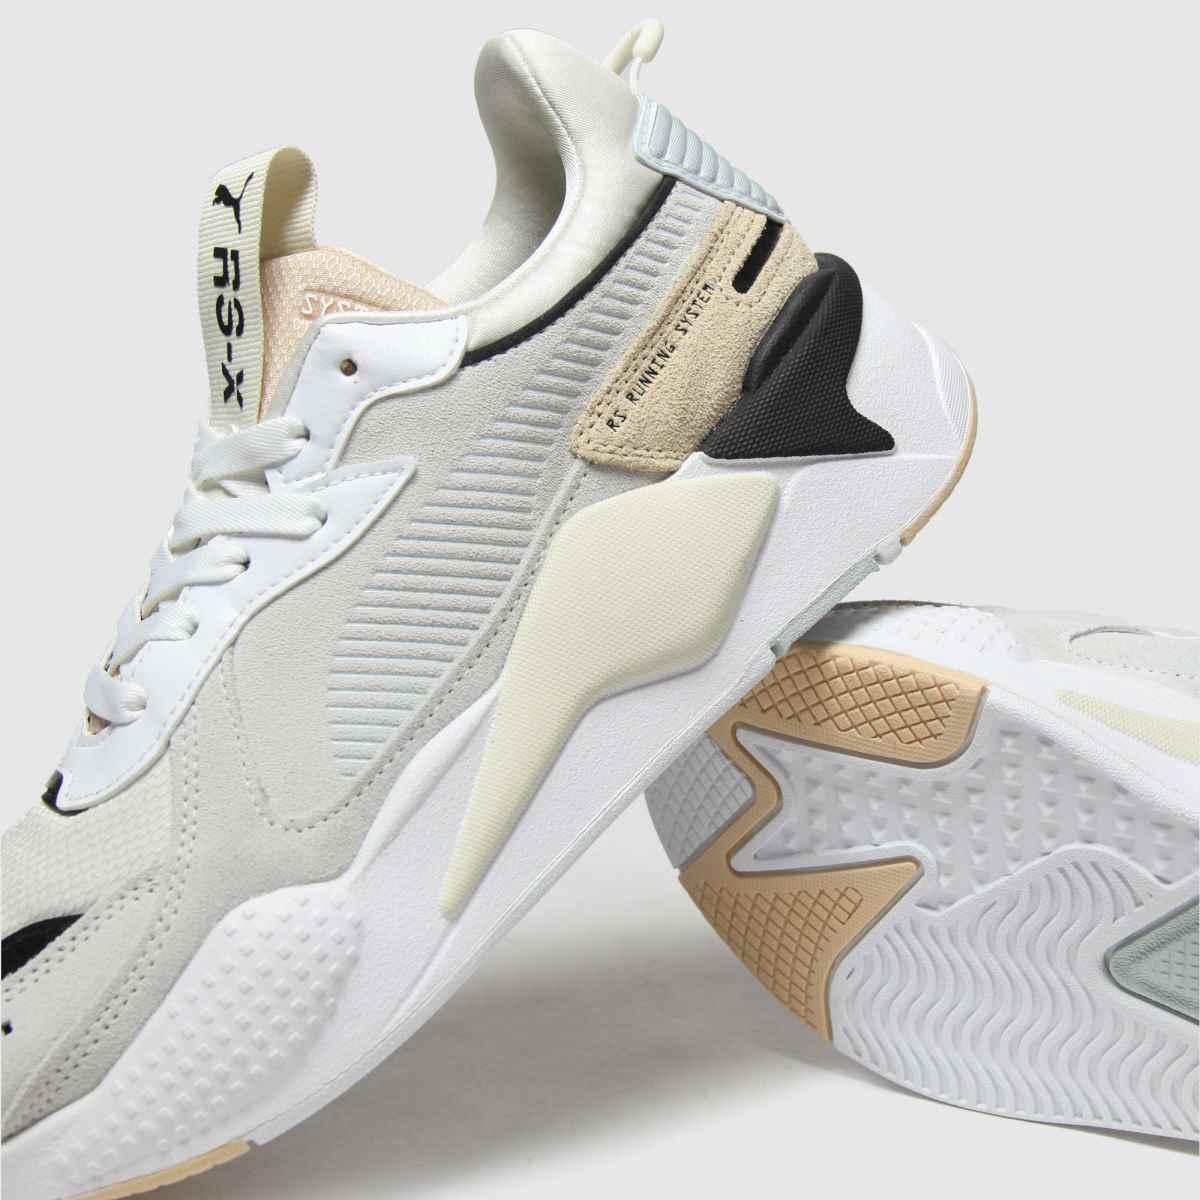 PUMA Suede White & Beige Rs-x Reinvent Trainers | Lyst UK